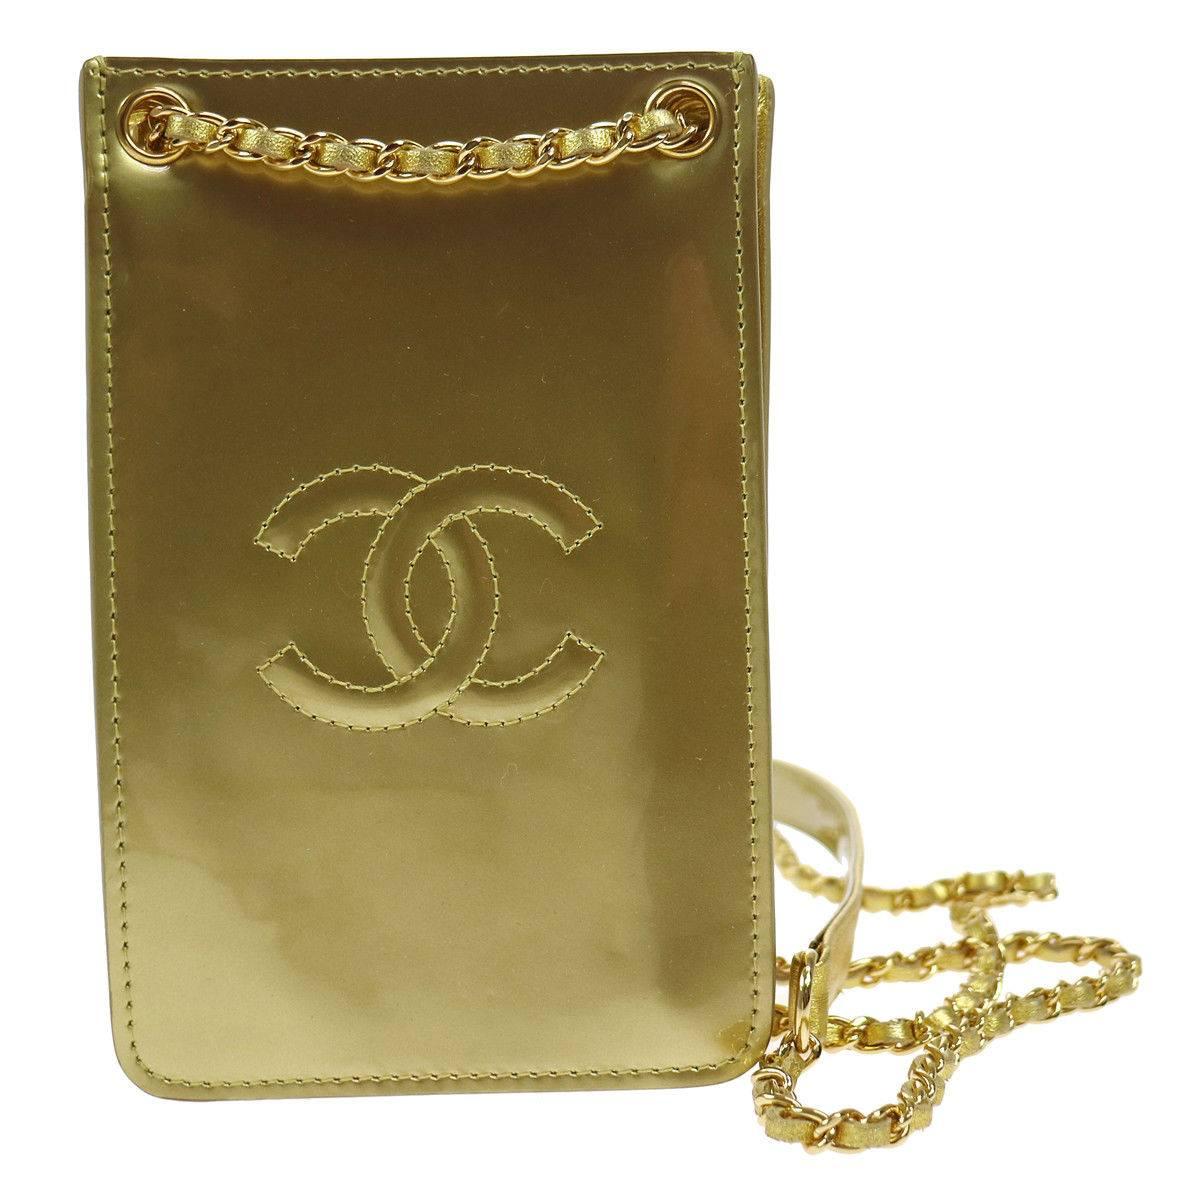 Chanel Patent Gold Cell Phone Case Mobile Crossbody Shoulder Bag in Box